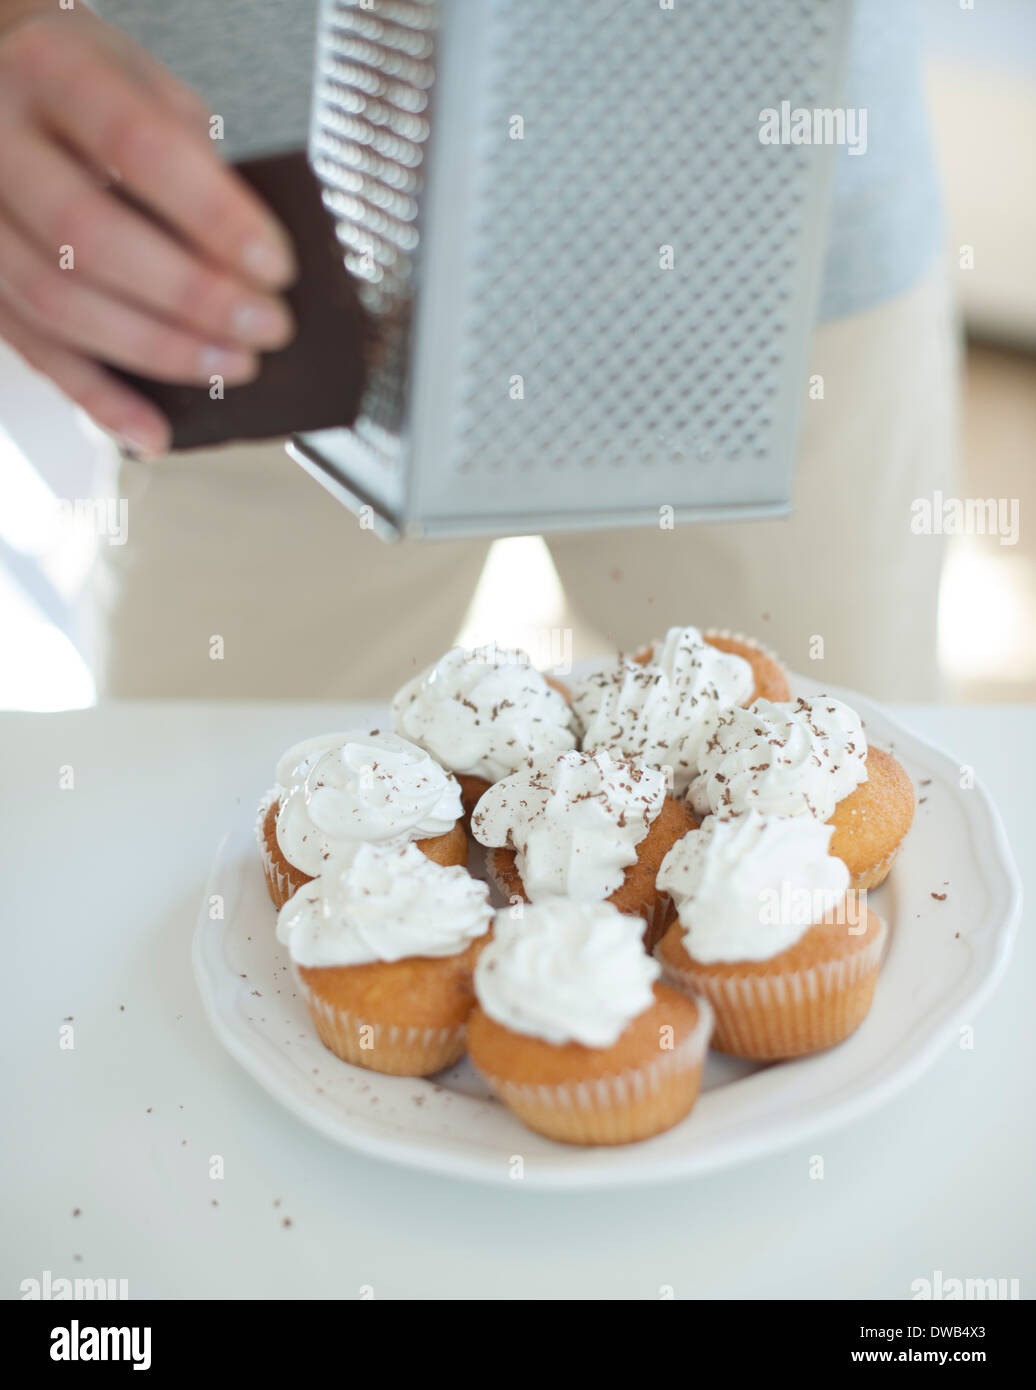 Cropped image of woman grating chocolate on cupcakes at counter Stock Photo